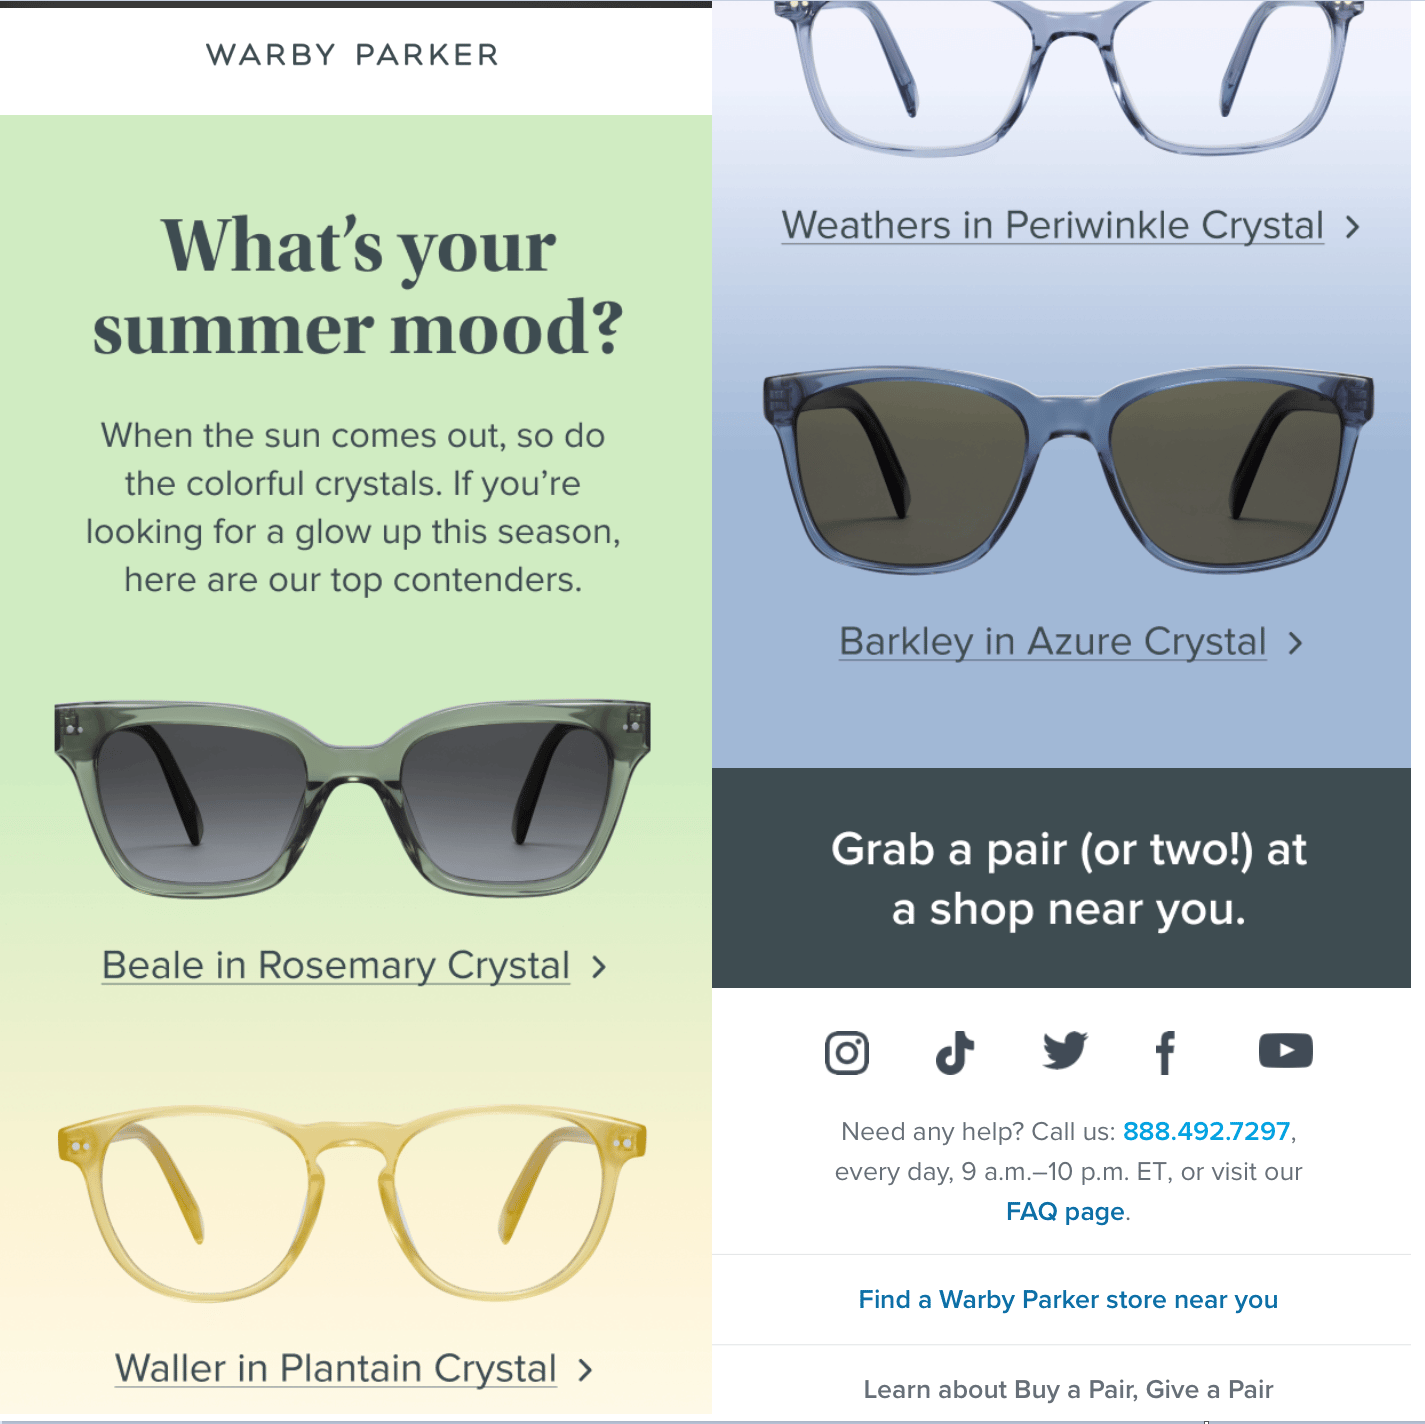 Warby Parker's email marketing is a content marketing example